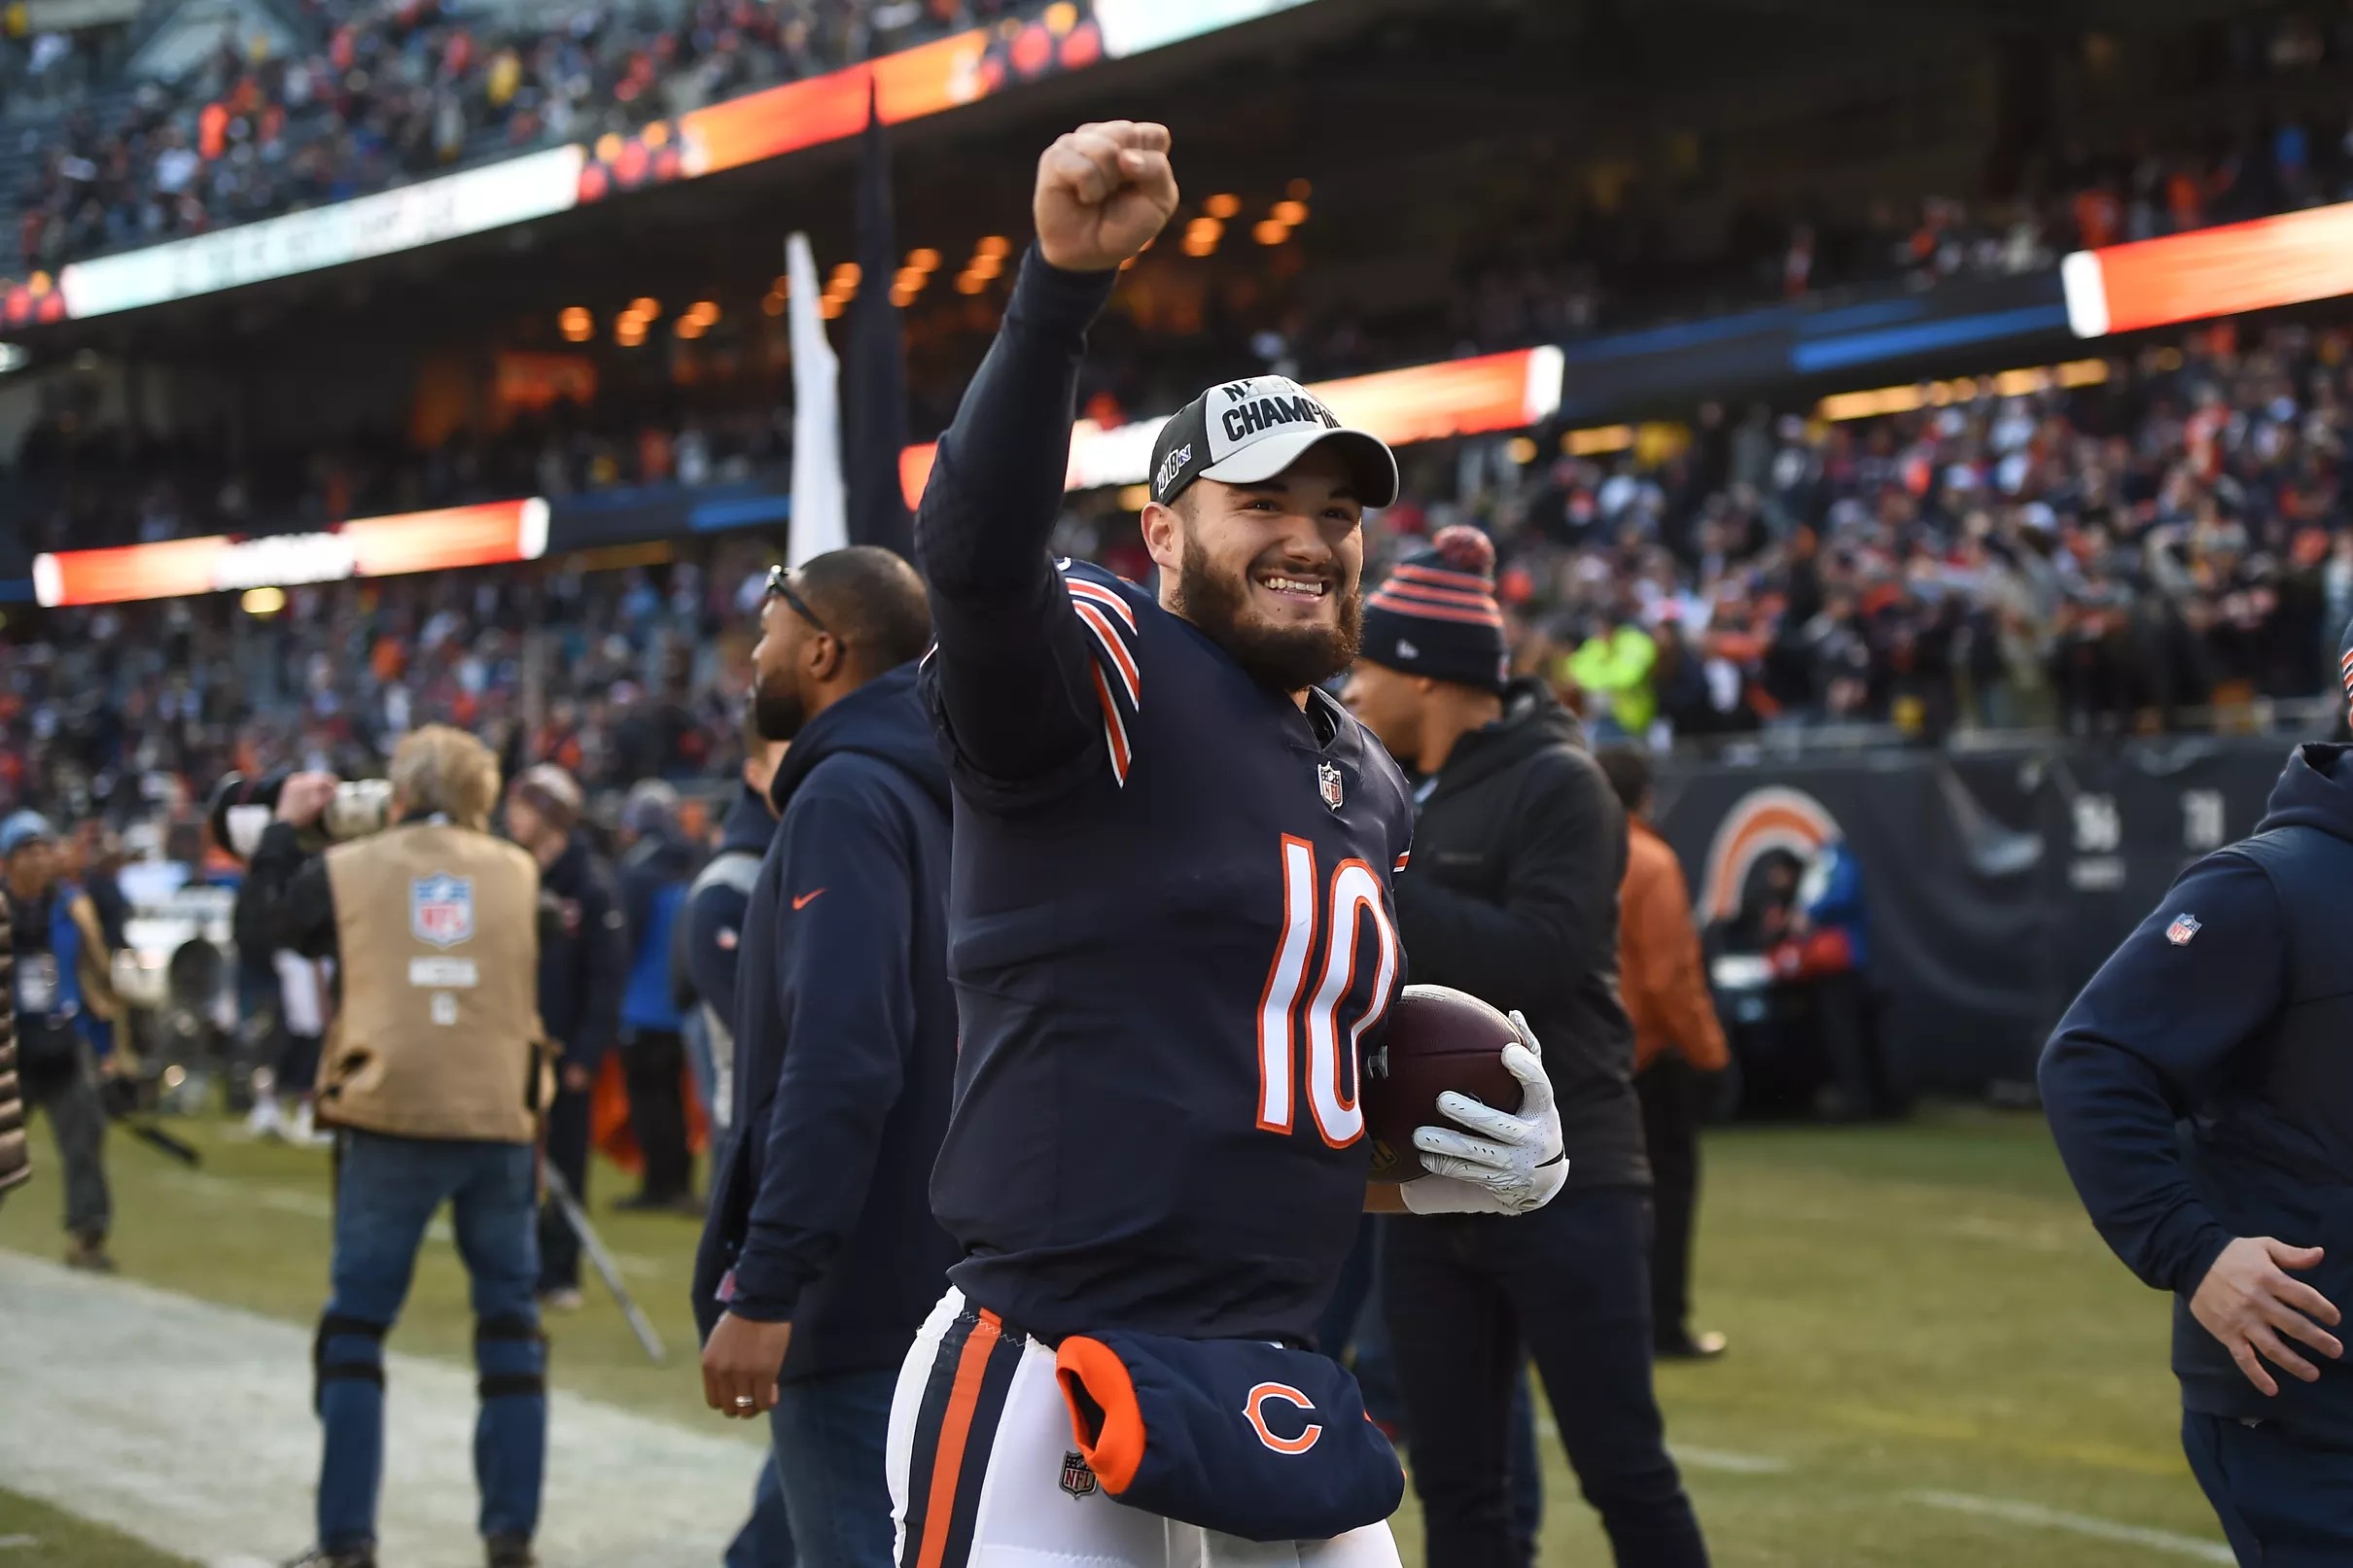 Bears playoff tickets to go on sale Thursday